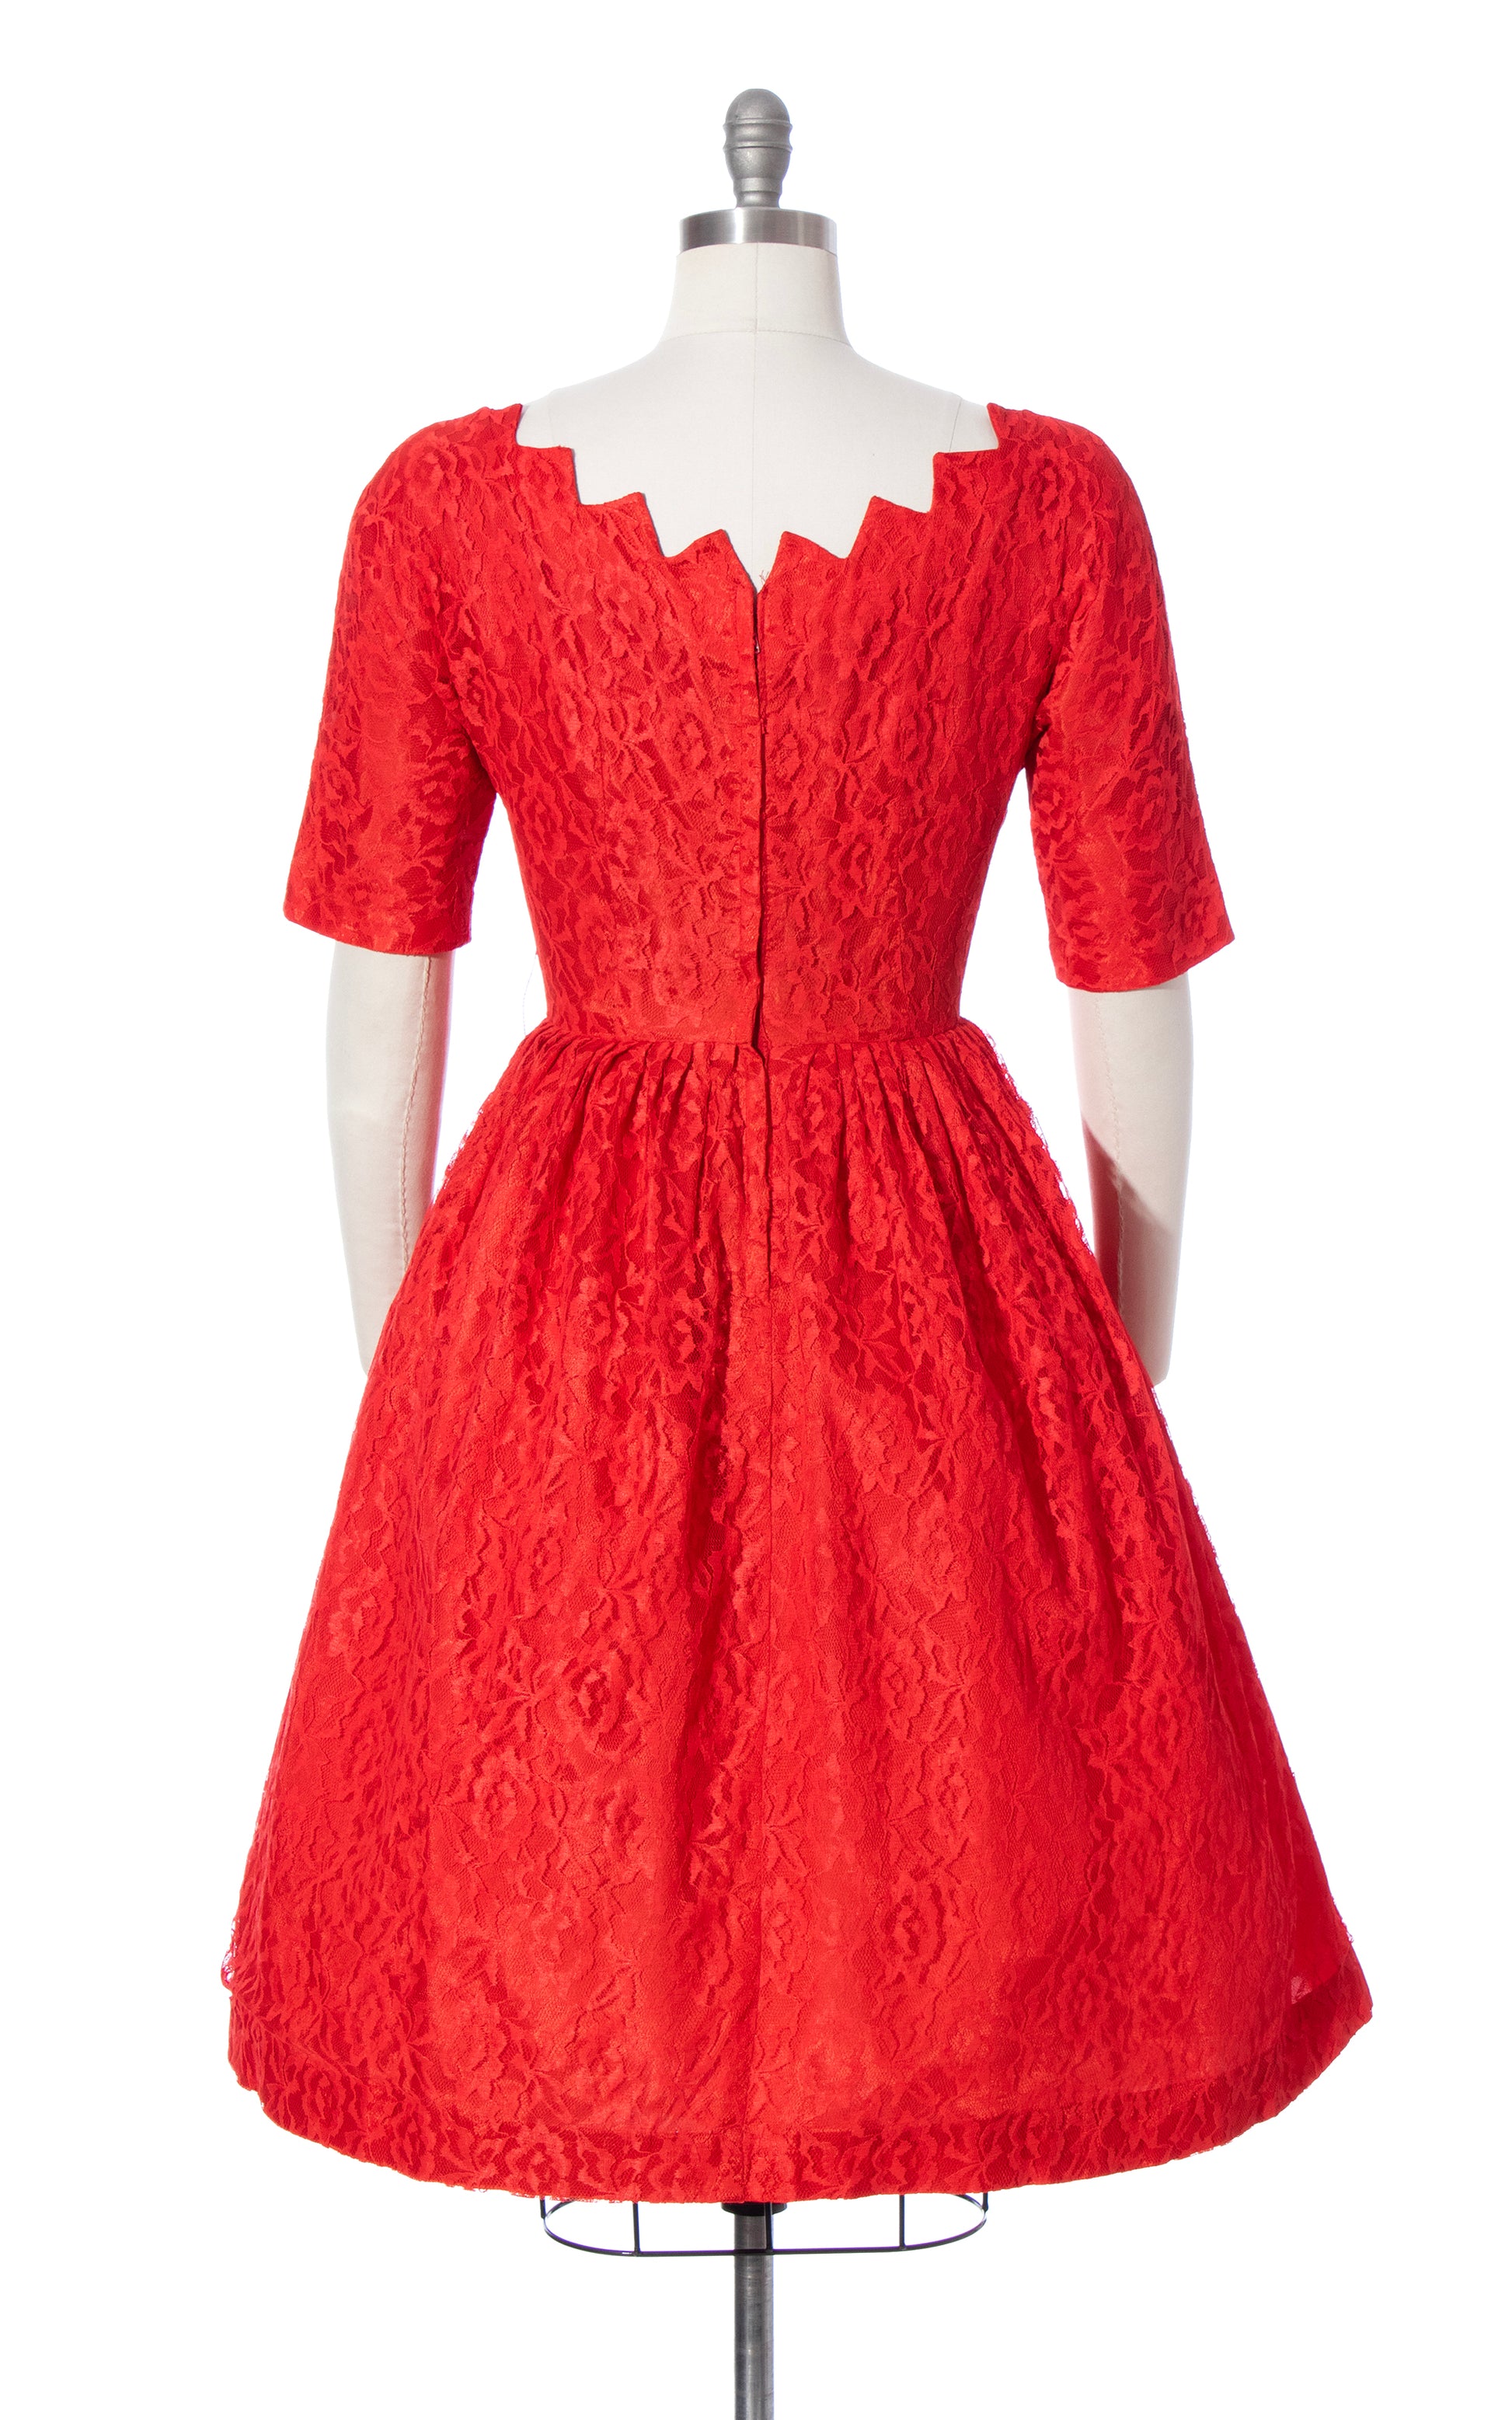 Vintage 50s 1950s Zig Zag Red Lace Party Dress Birthday Life Vintage